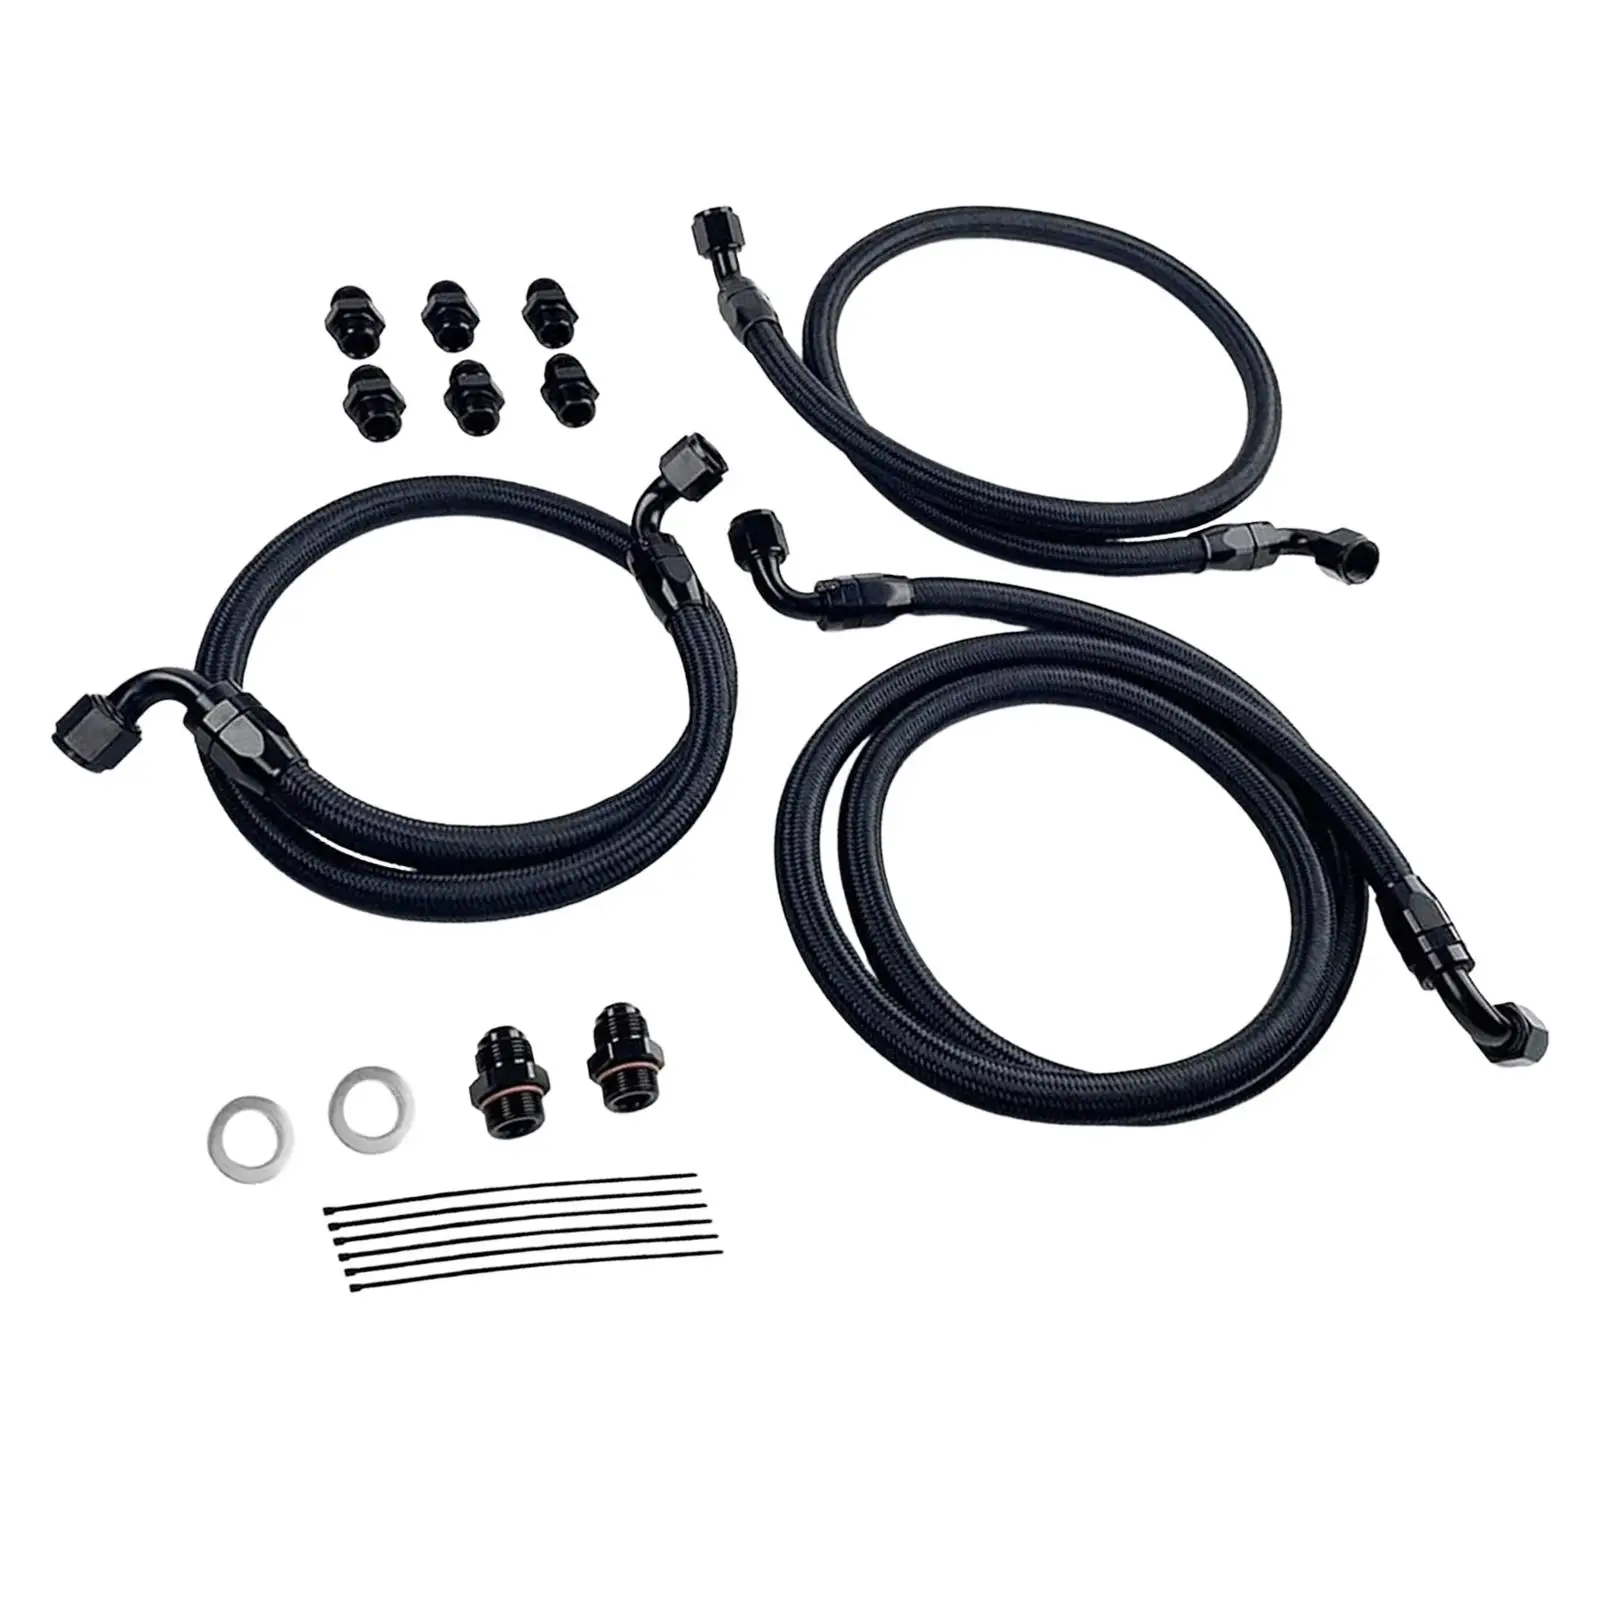 Transmission Cooler Hose Line Kit Hydraulic Hoses Prevent Leaks Transmission Cooler Hose Fittings for Chevy 2500 3500 Odl14